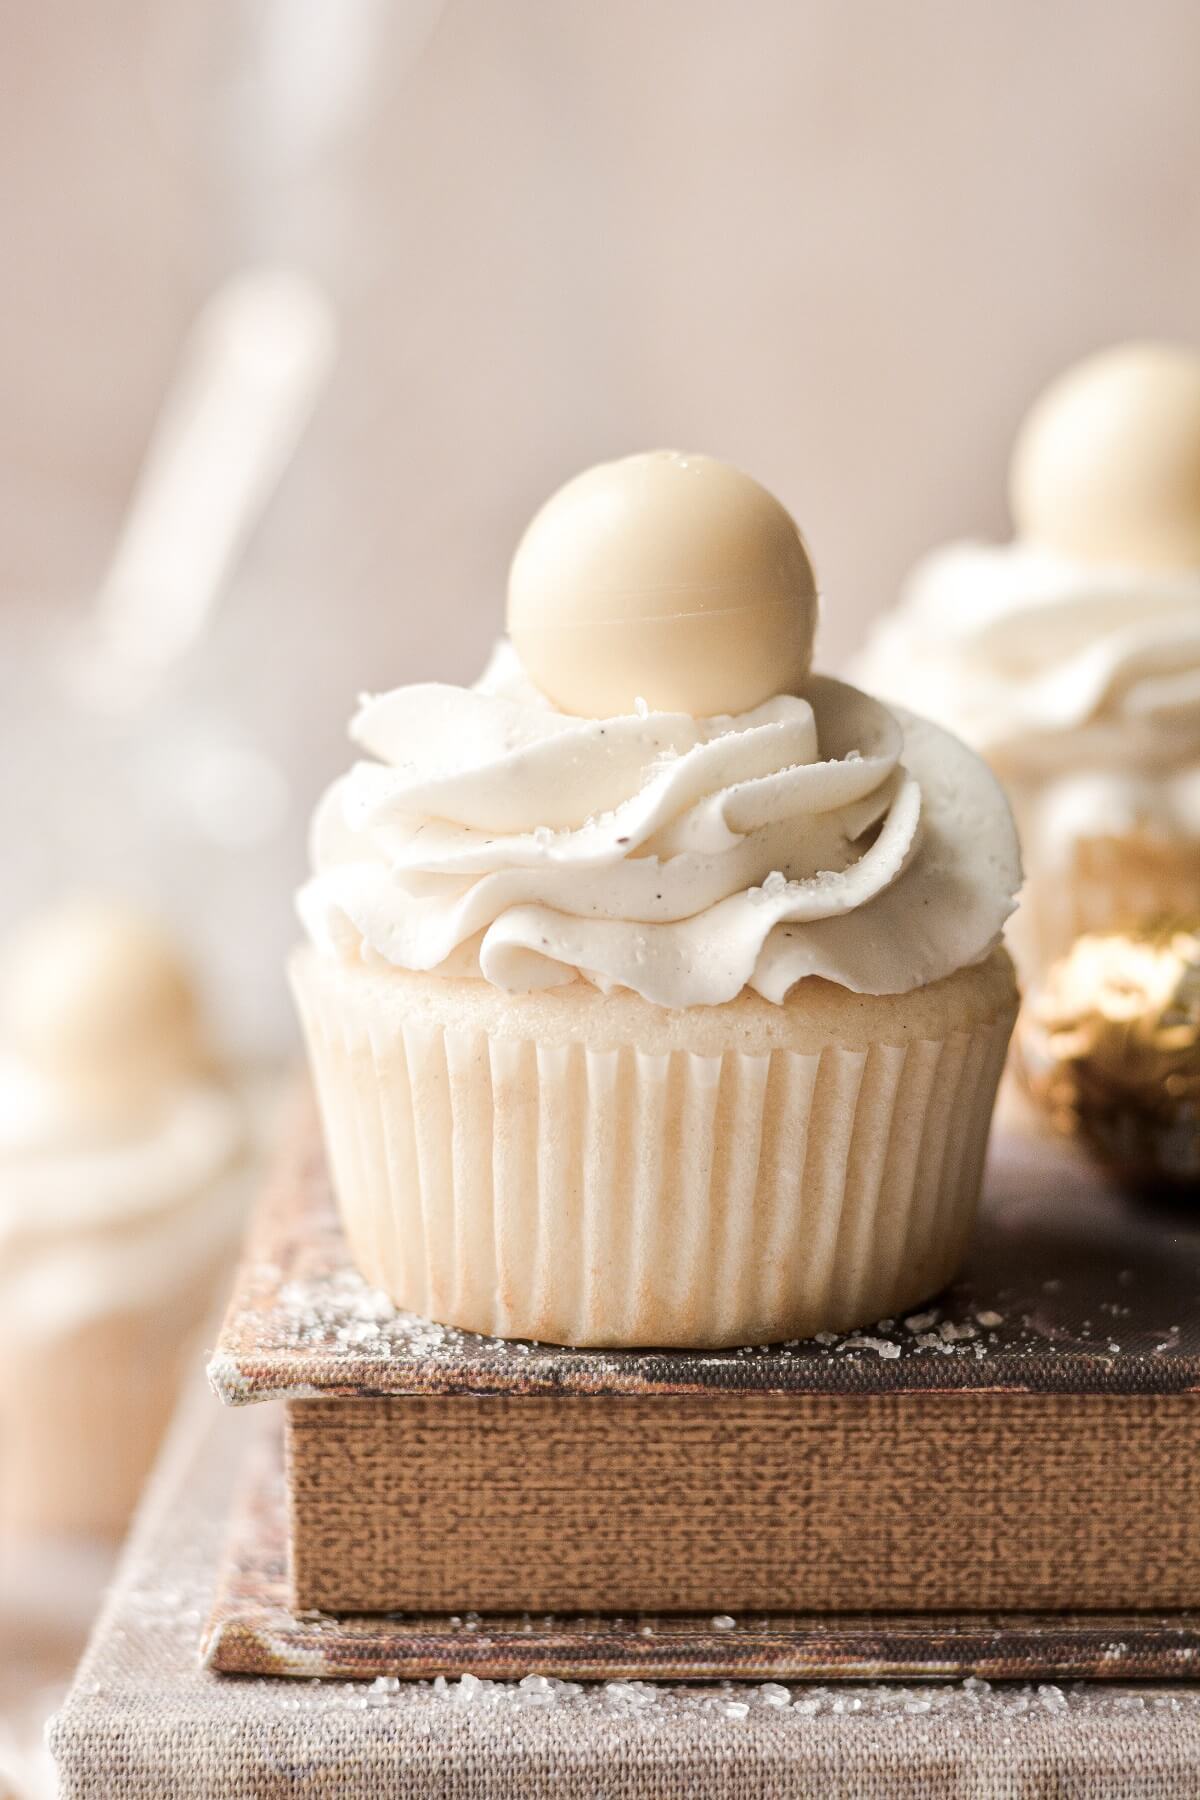 A white velvet cupcake topped with a white chocolate truffle, sitting on top of a book.